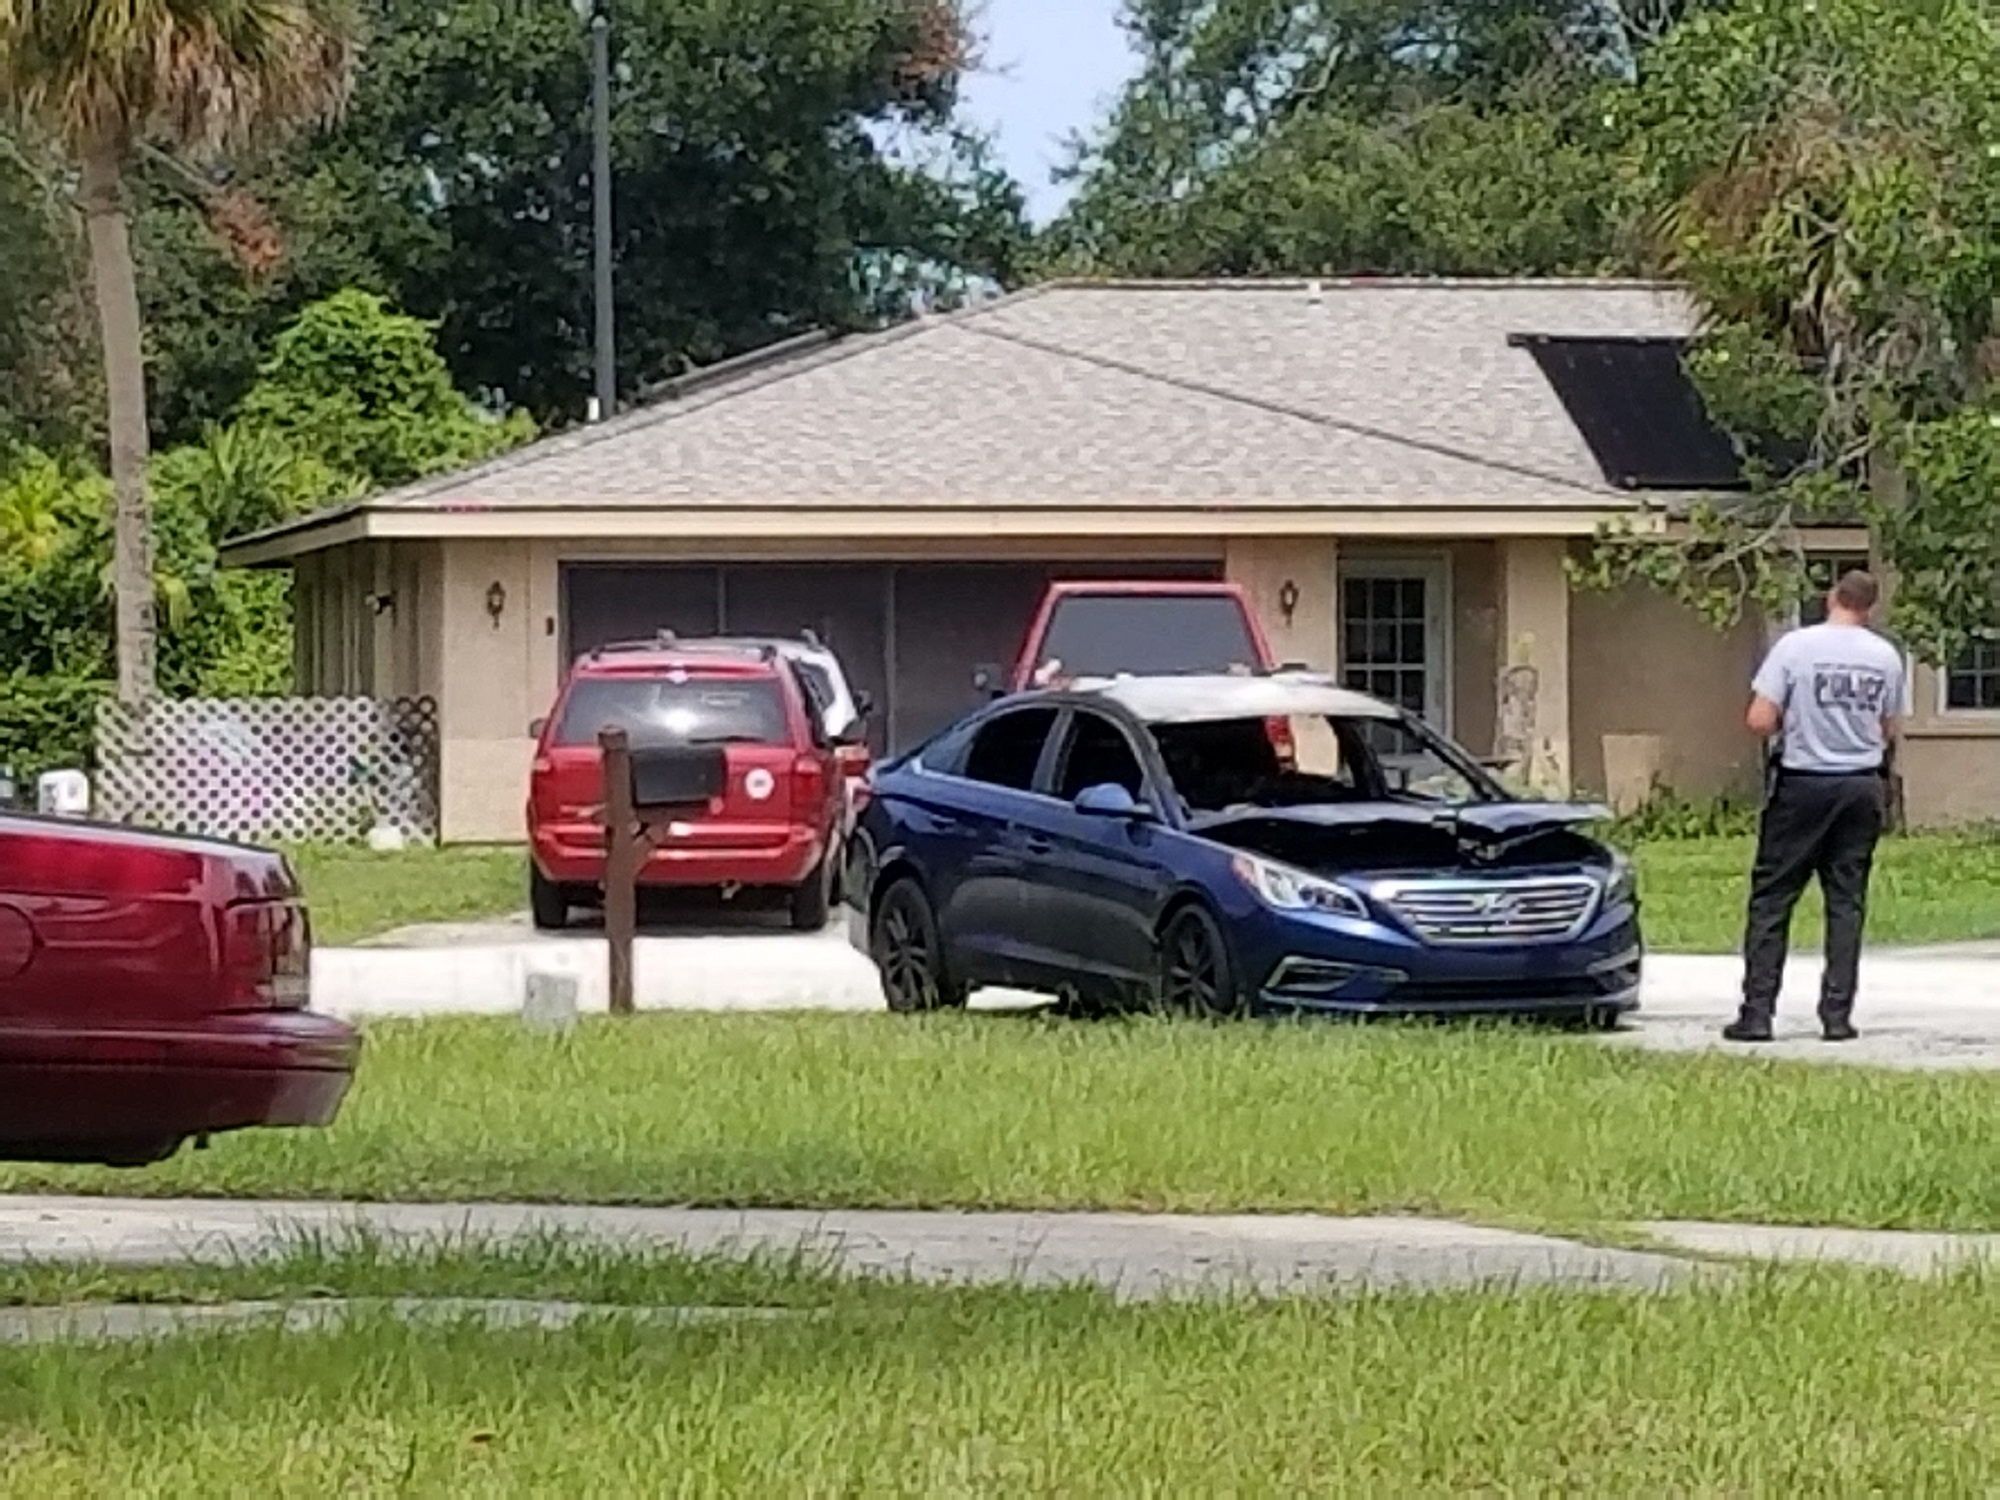 The blue car that was set on fire at Blair Court. Photo courtesy of the Flagler County Sheriff's Office